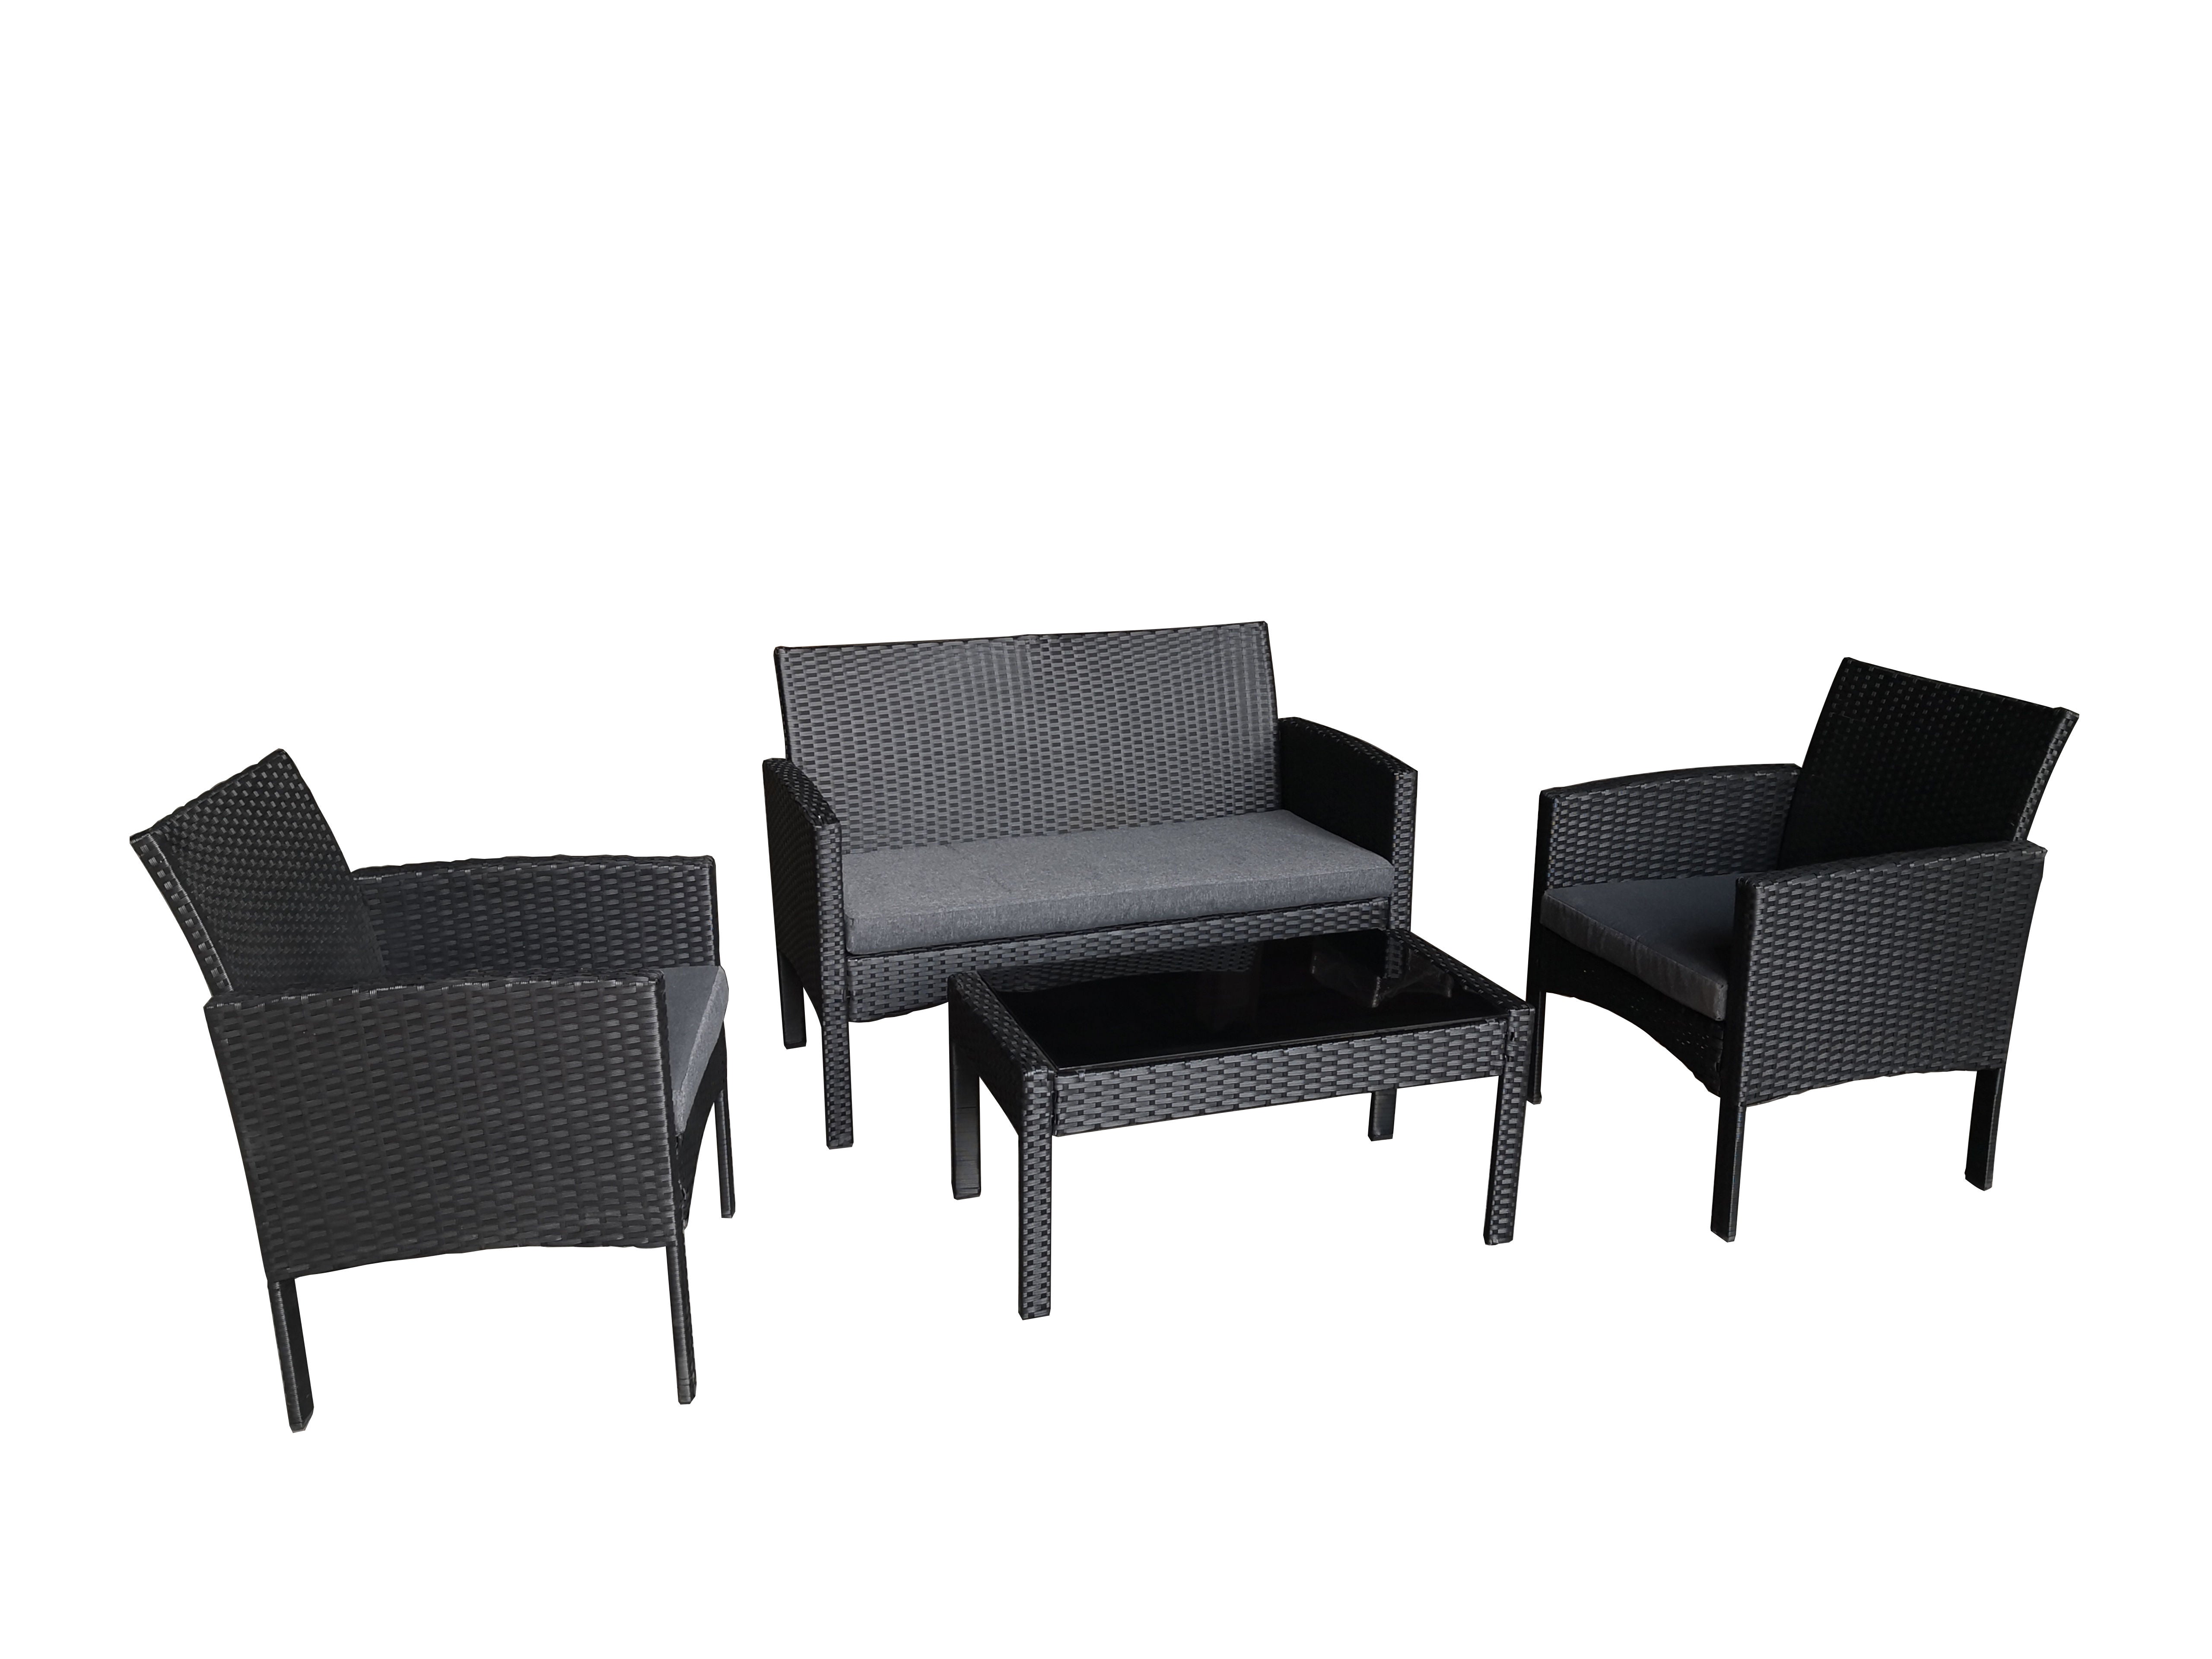 PatioZone 4Pcs Wicker Conversation Set with Polyester Cushions and Steel Frame (MOSS-MT22-607) - Black / Grey